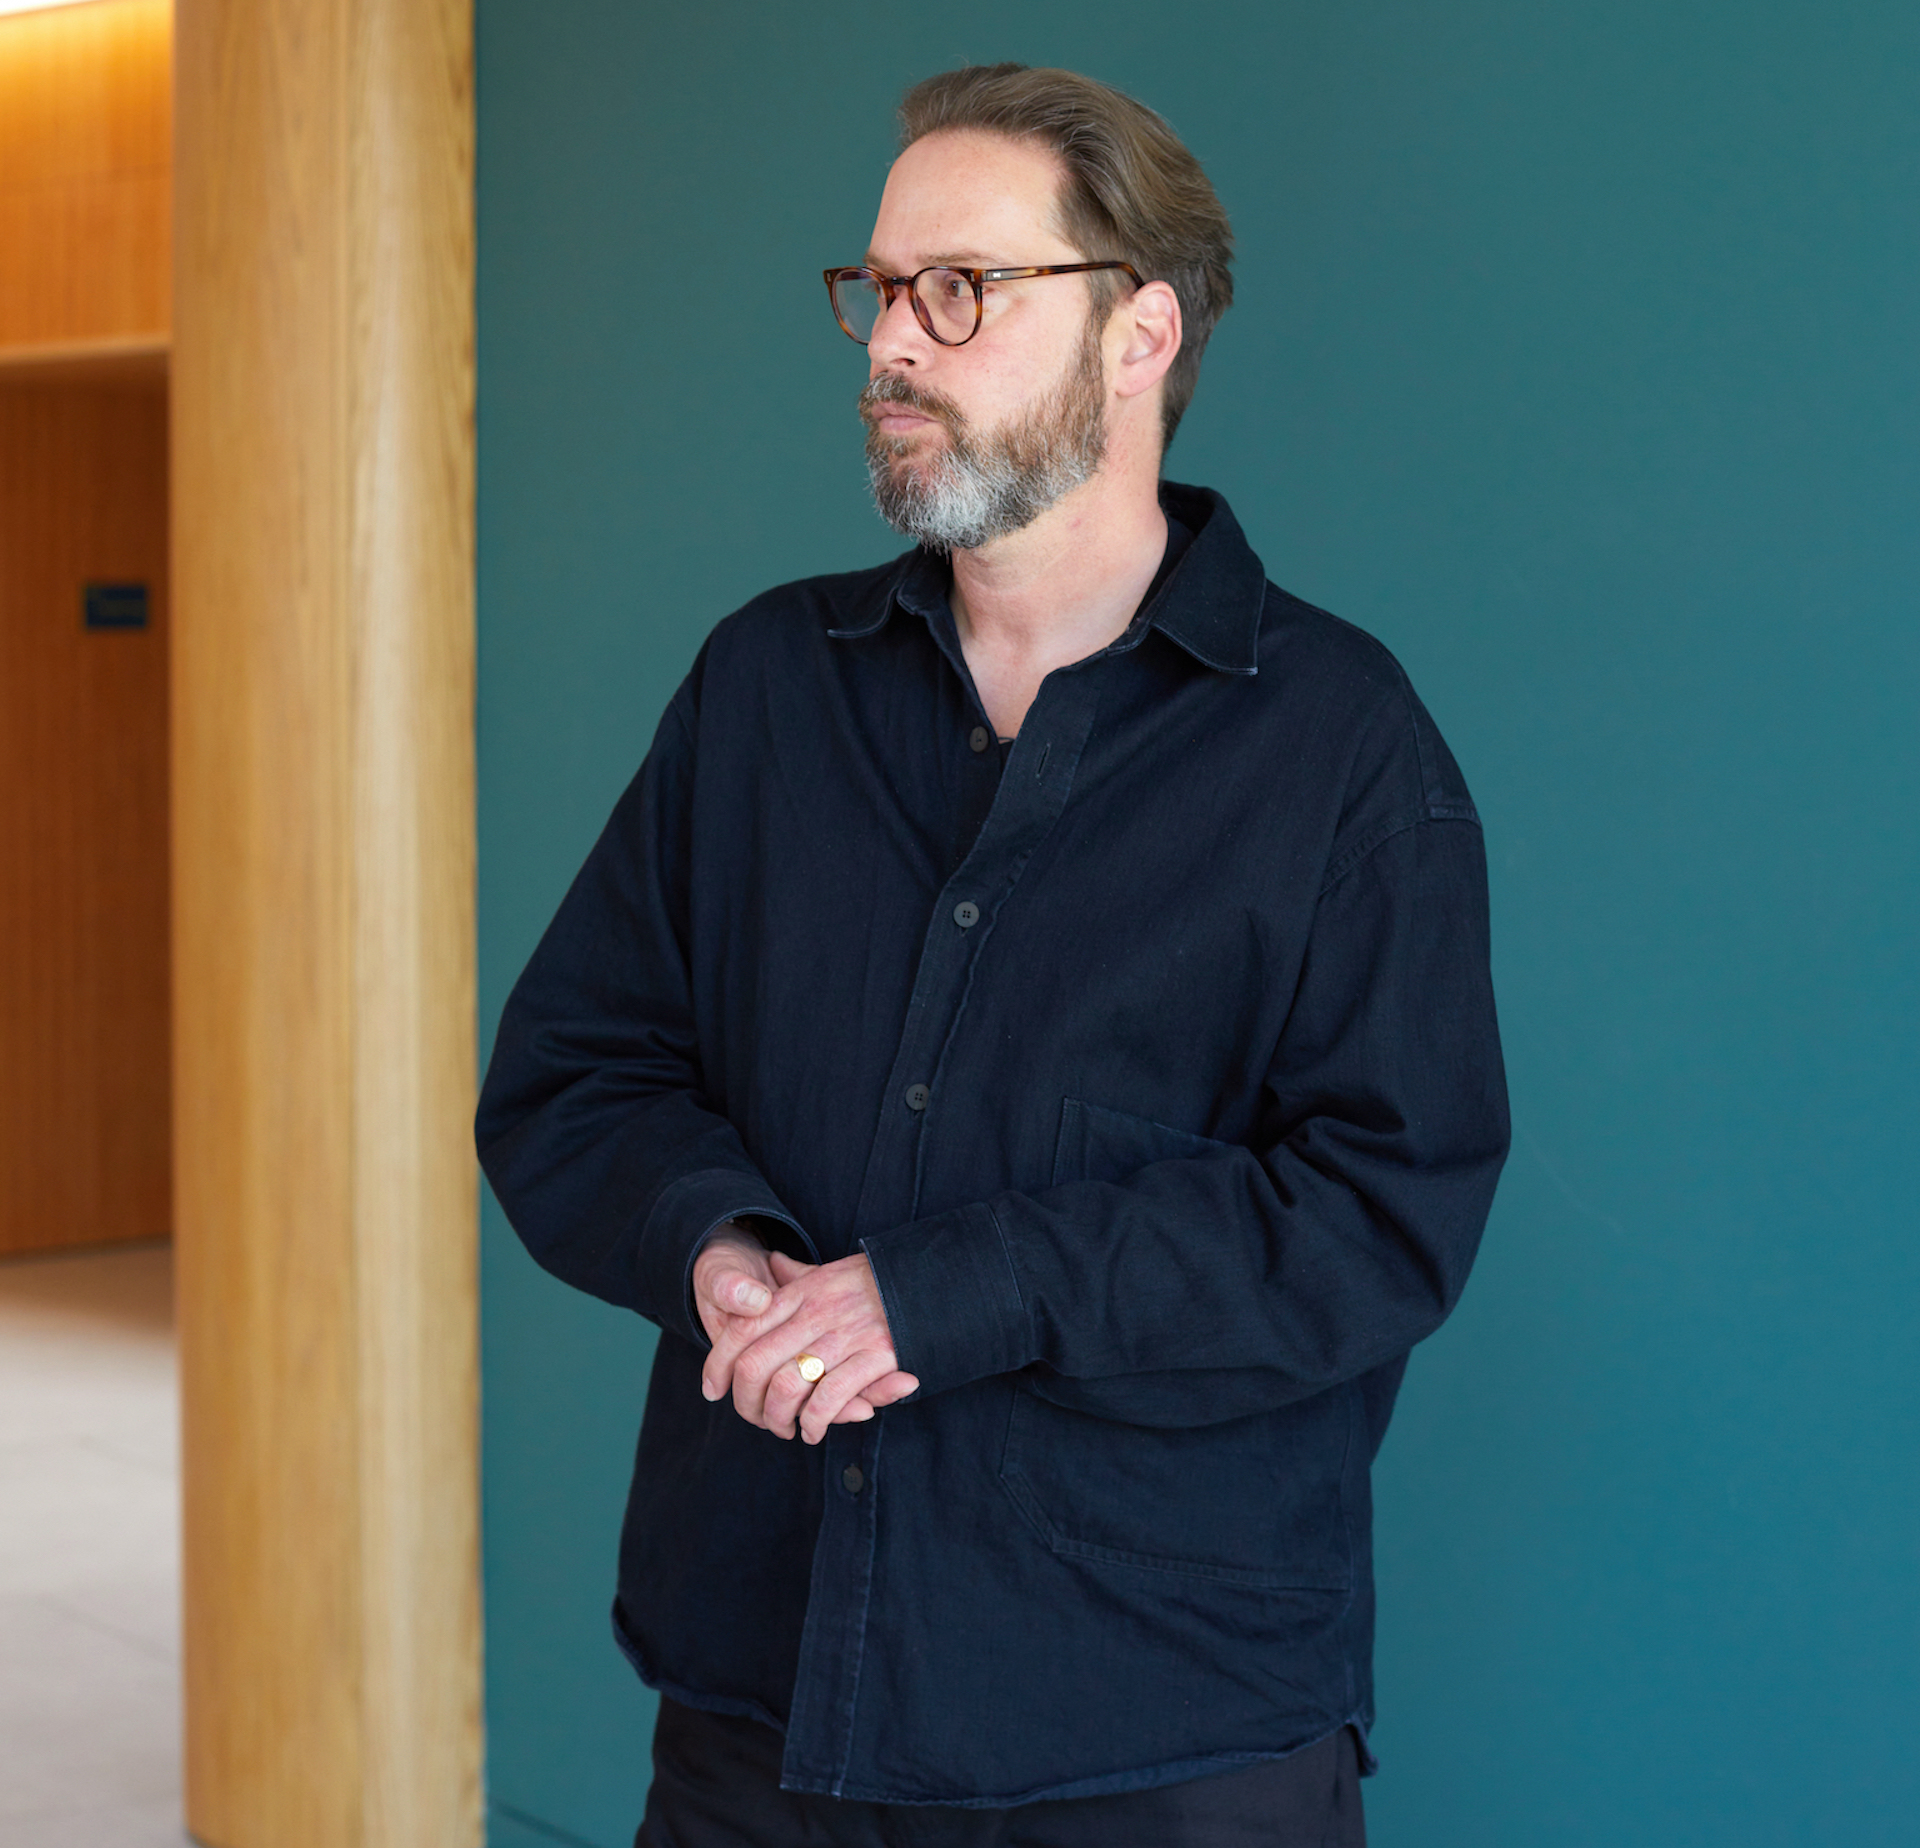 Profile image of Liam Wells wearing a dark navy shirt stood against a teal coloured wall.